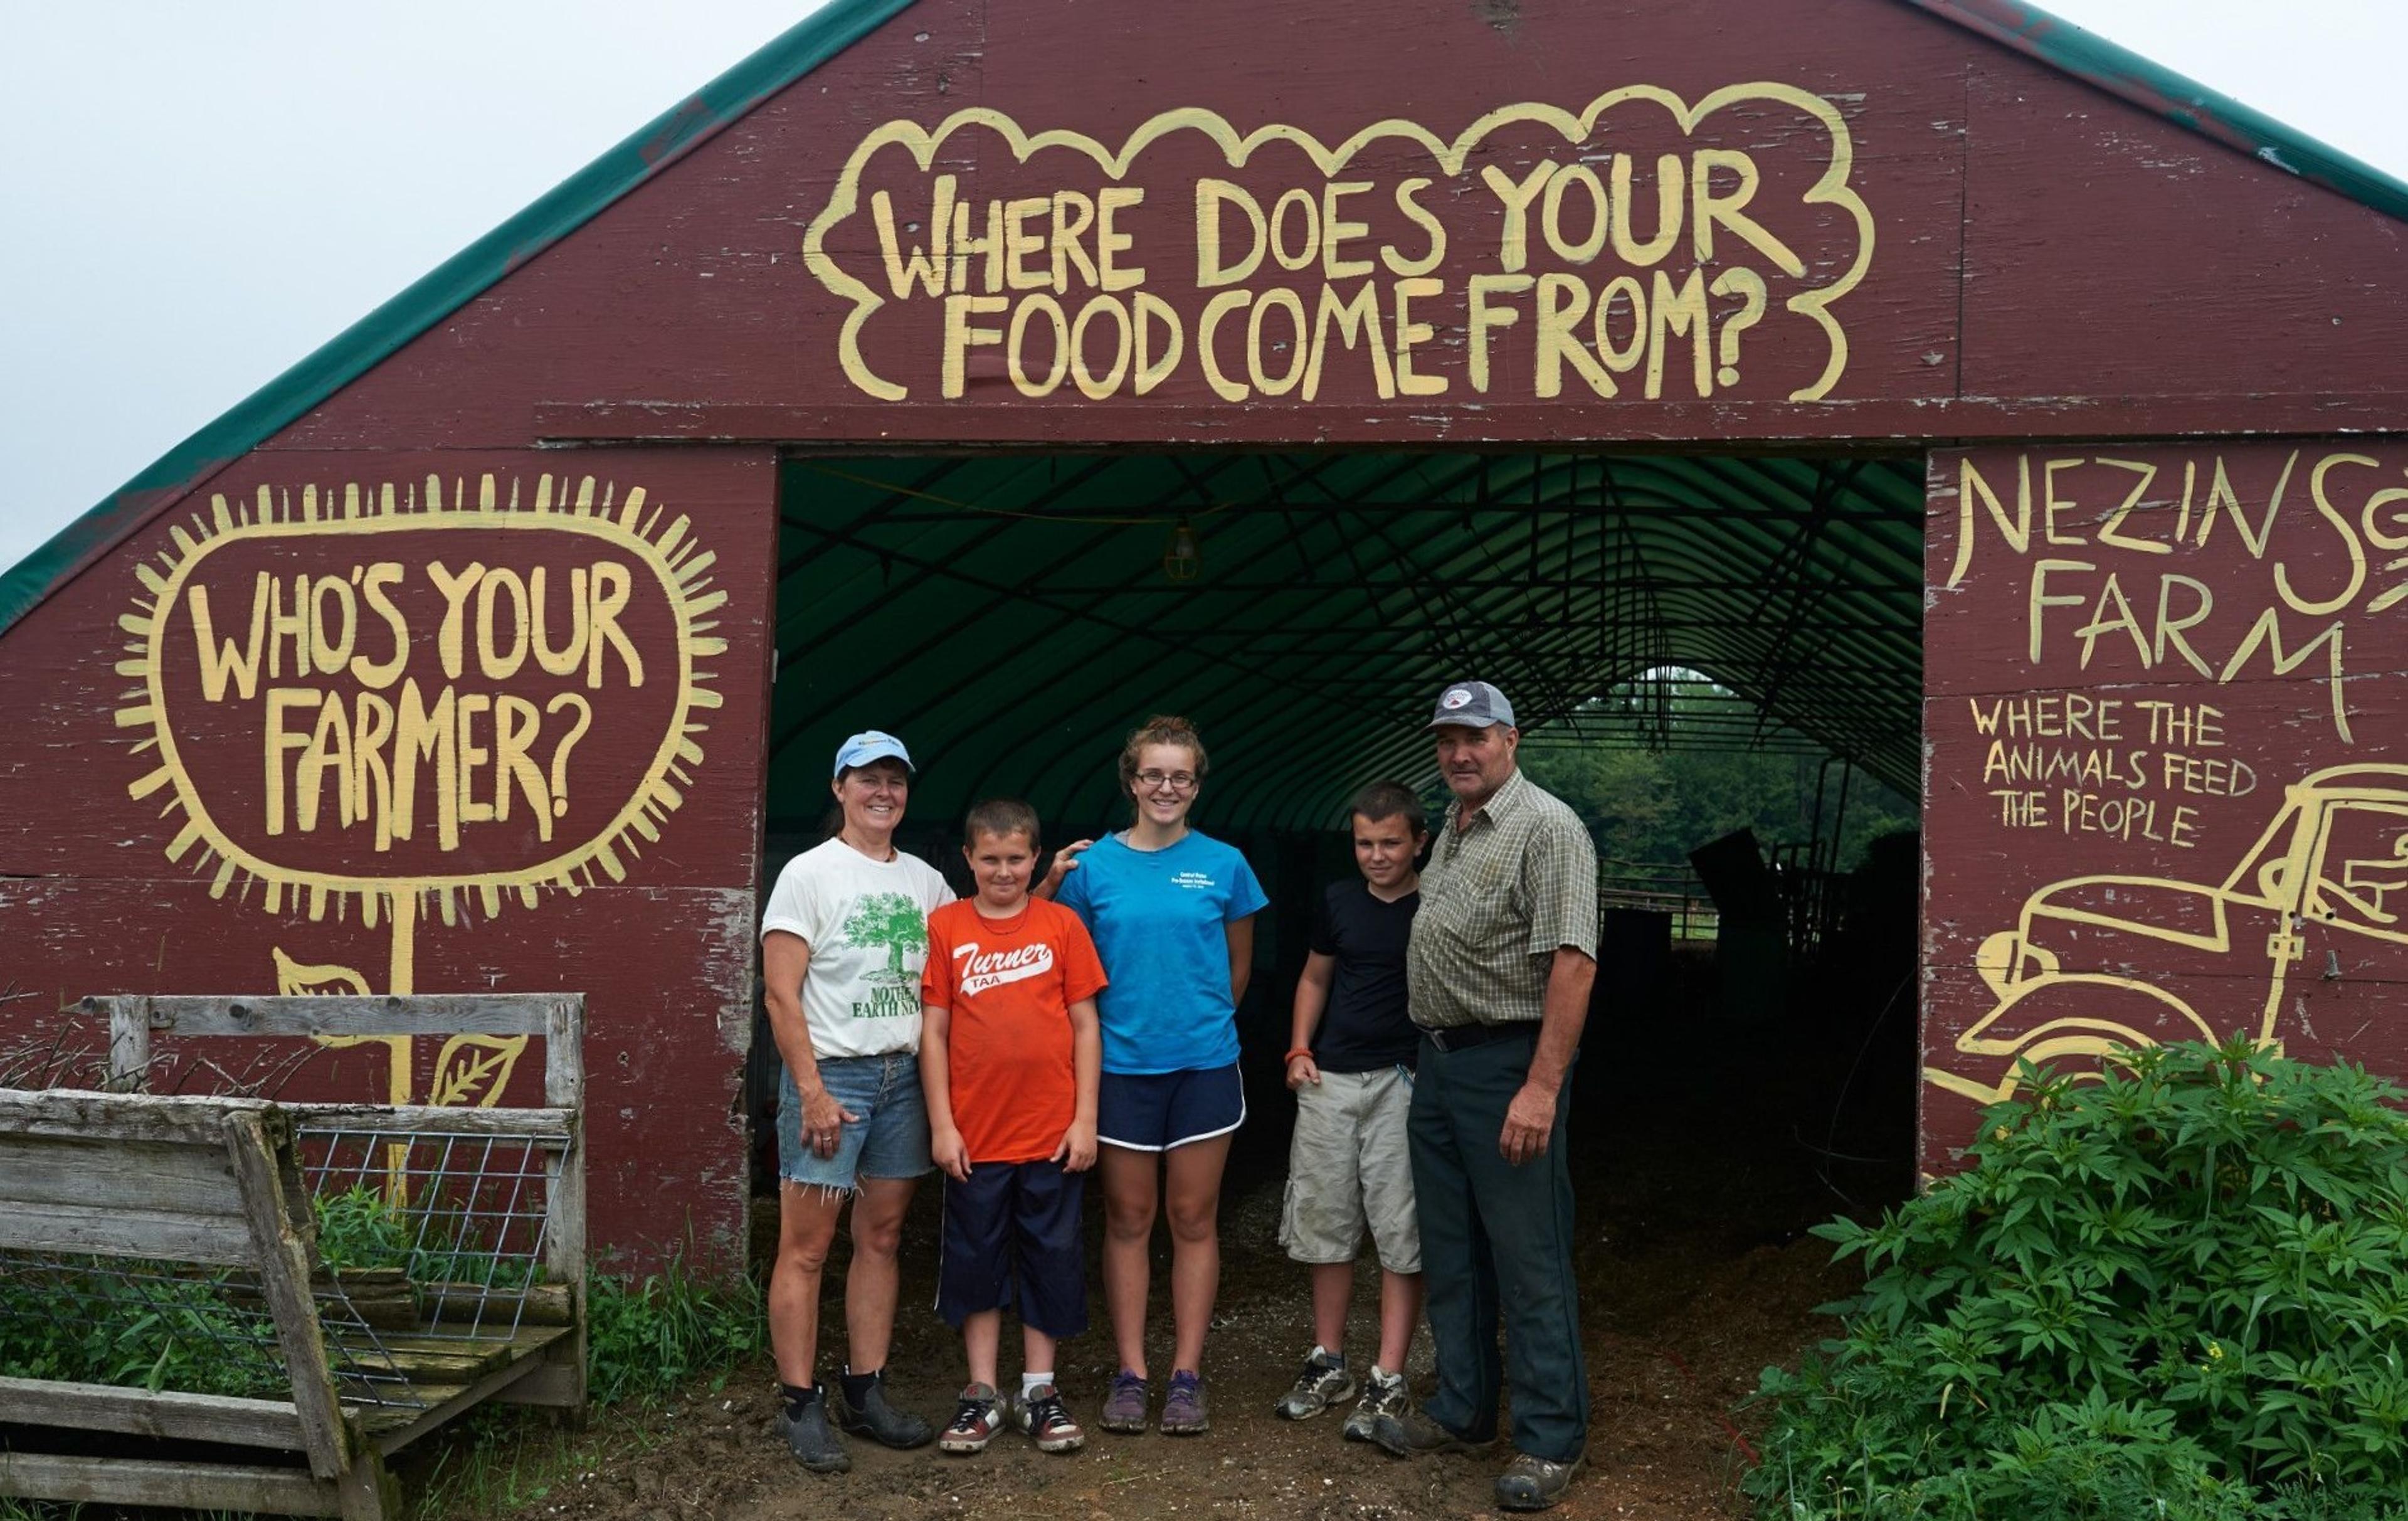 Five members of the Varney family in Maine stand in the doorway of a barn that has “who’s your farmer?” and “where does your food come from” painted on it.